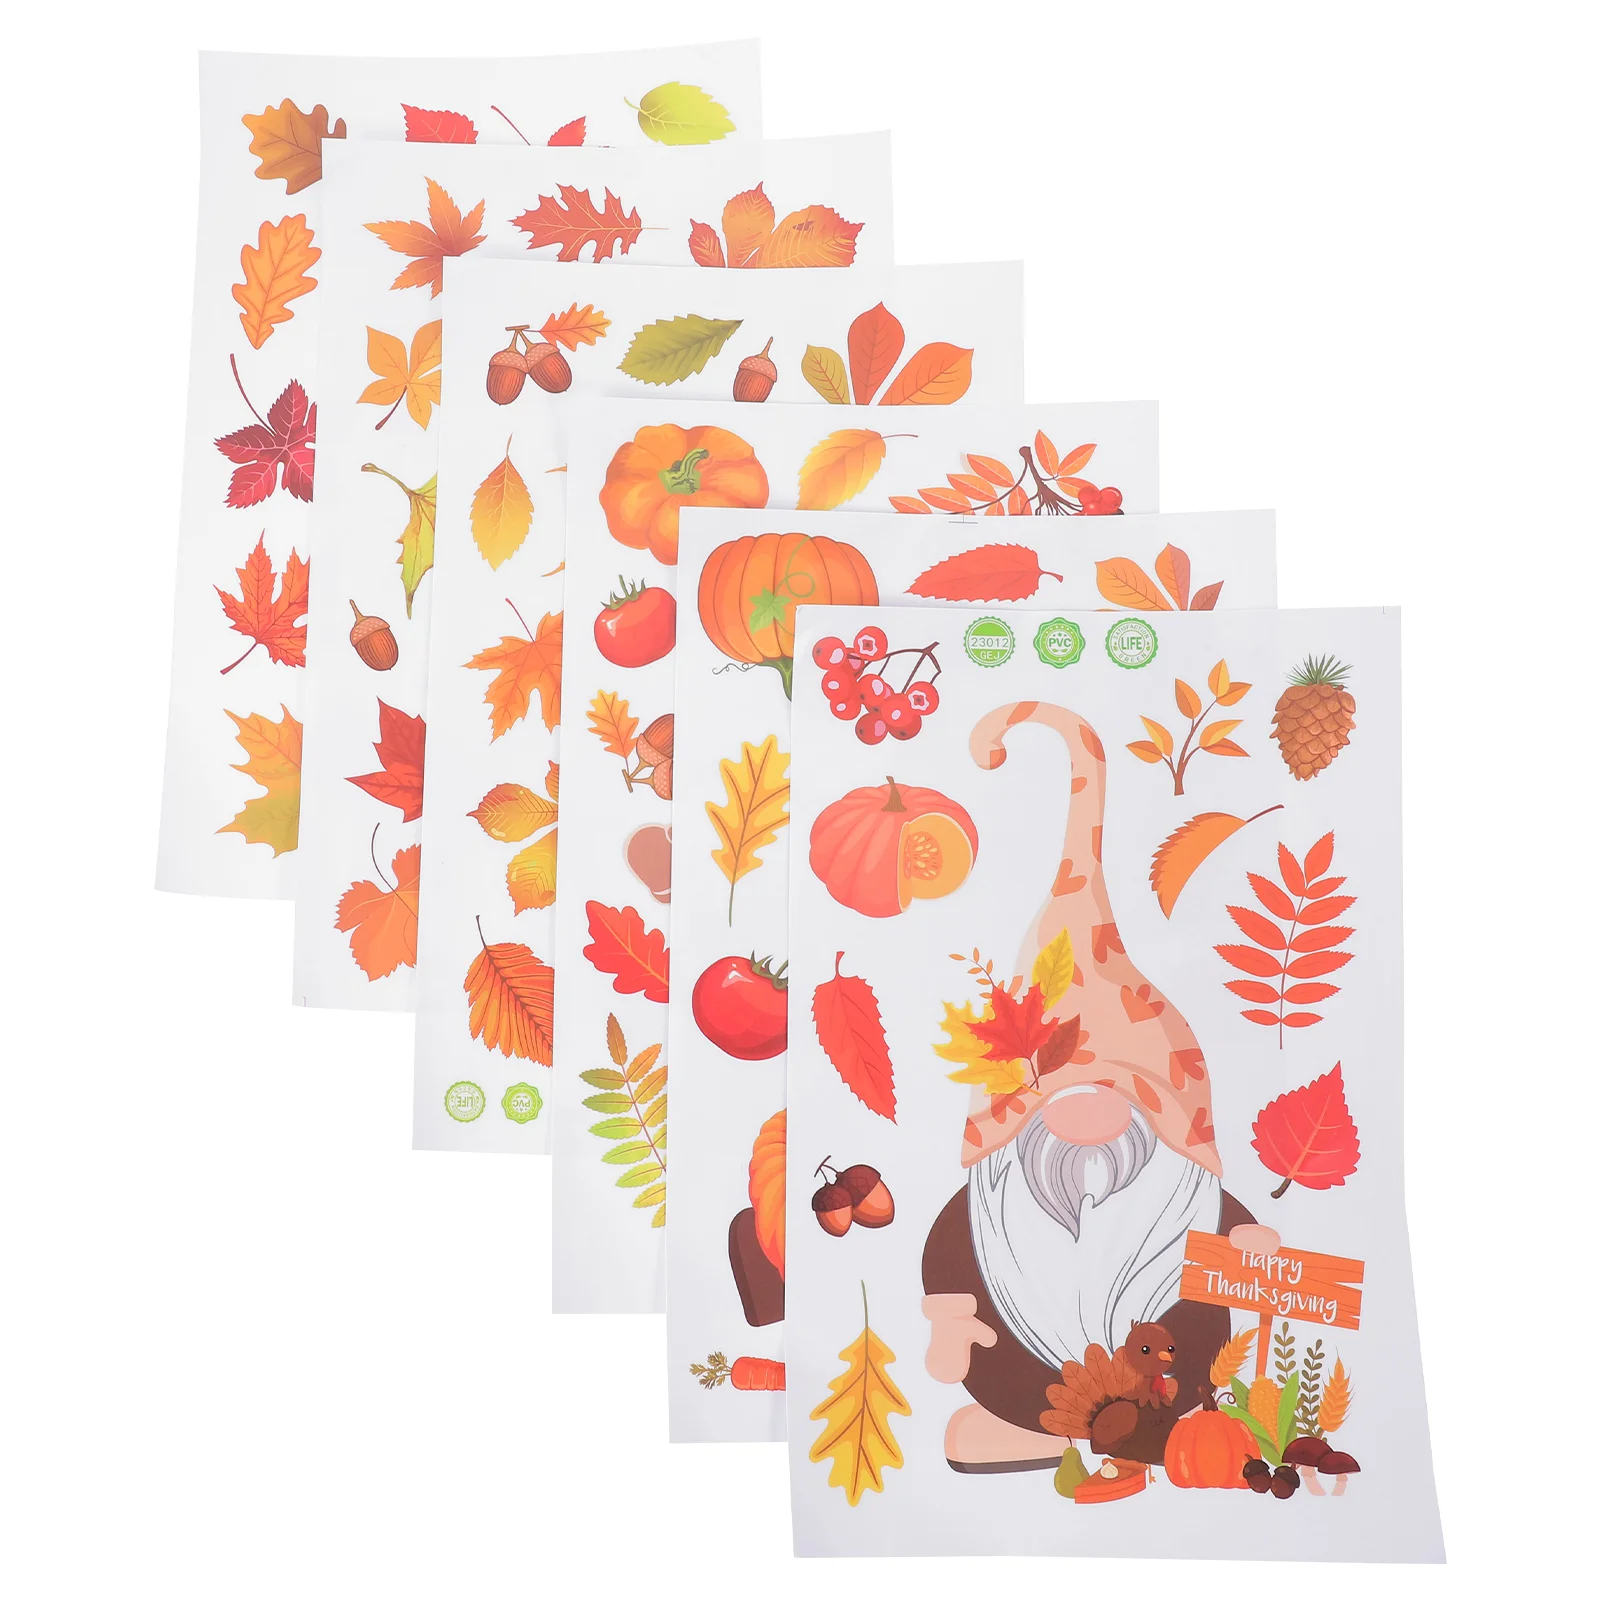 

6 Sheets Home Decor Window Clings Stickers For Fall Thanksgiving Static Decorations